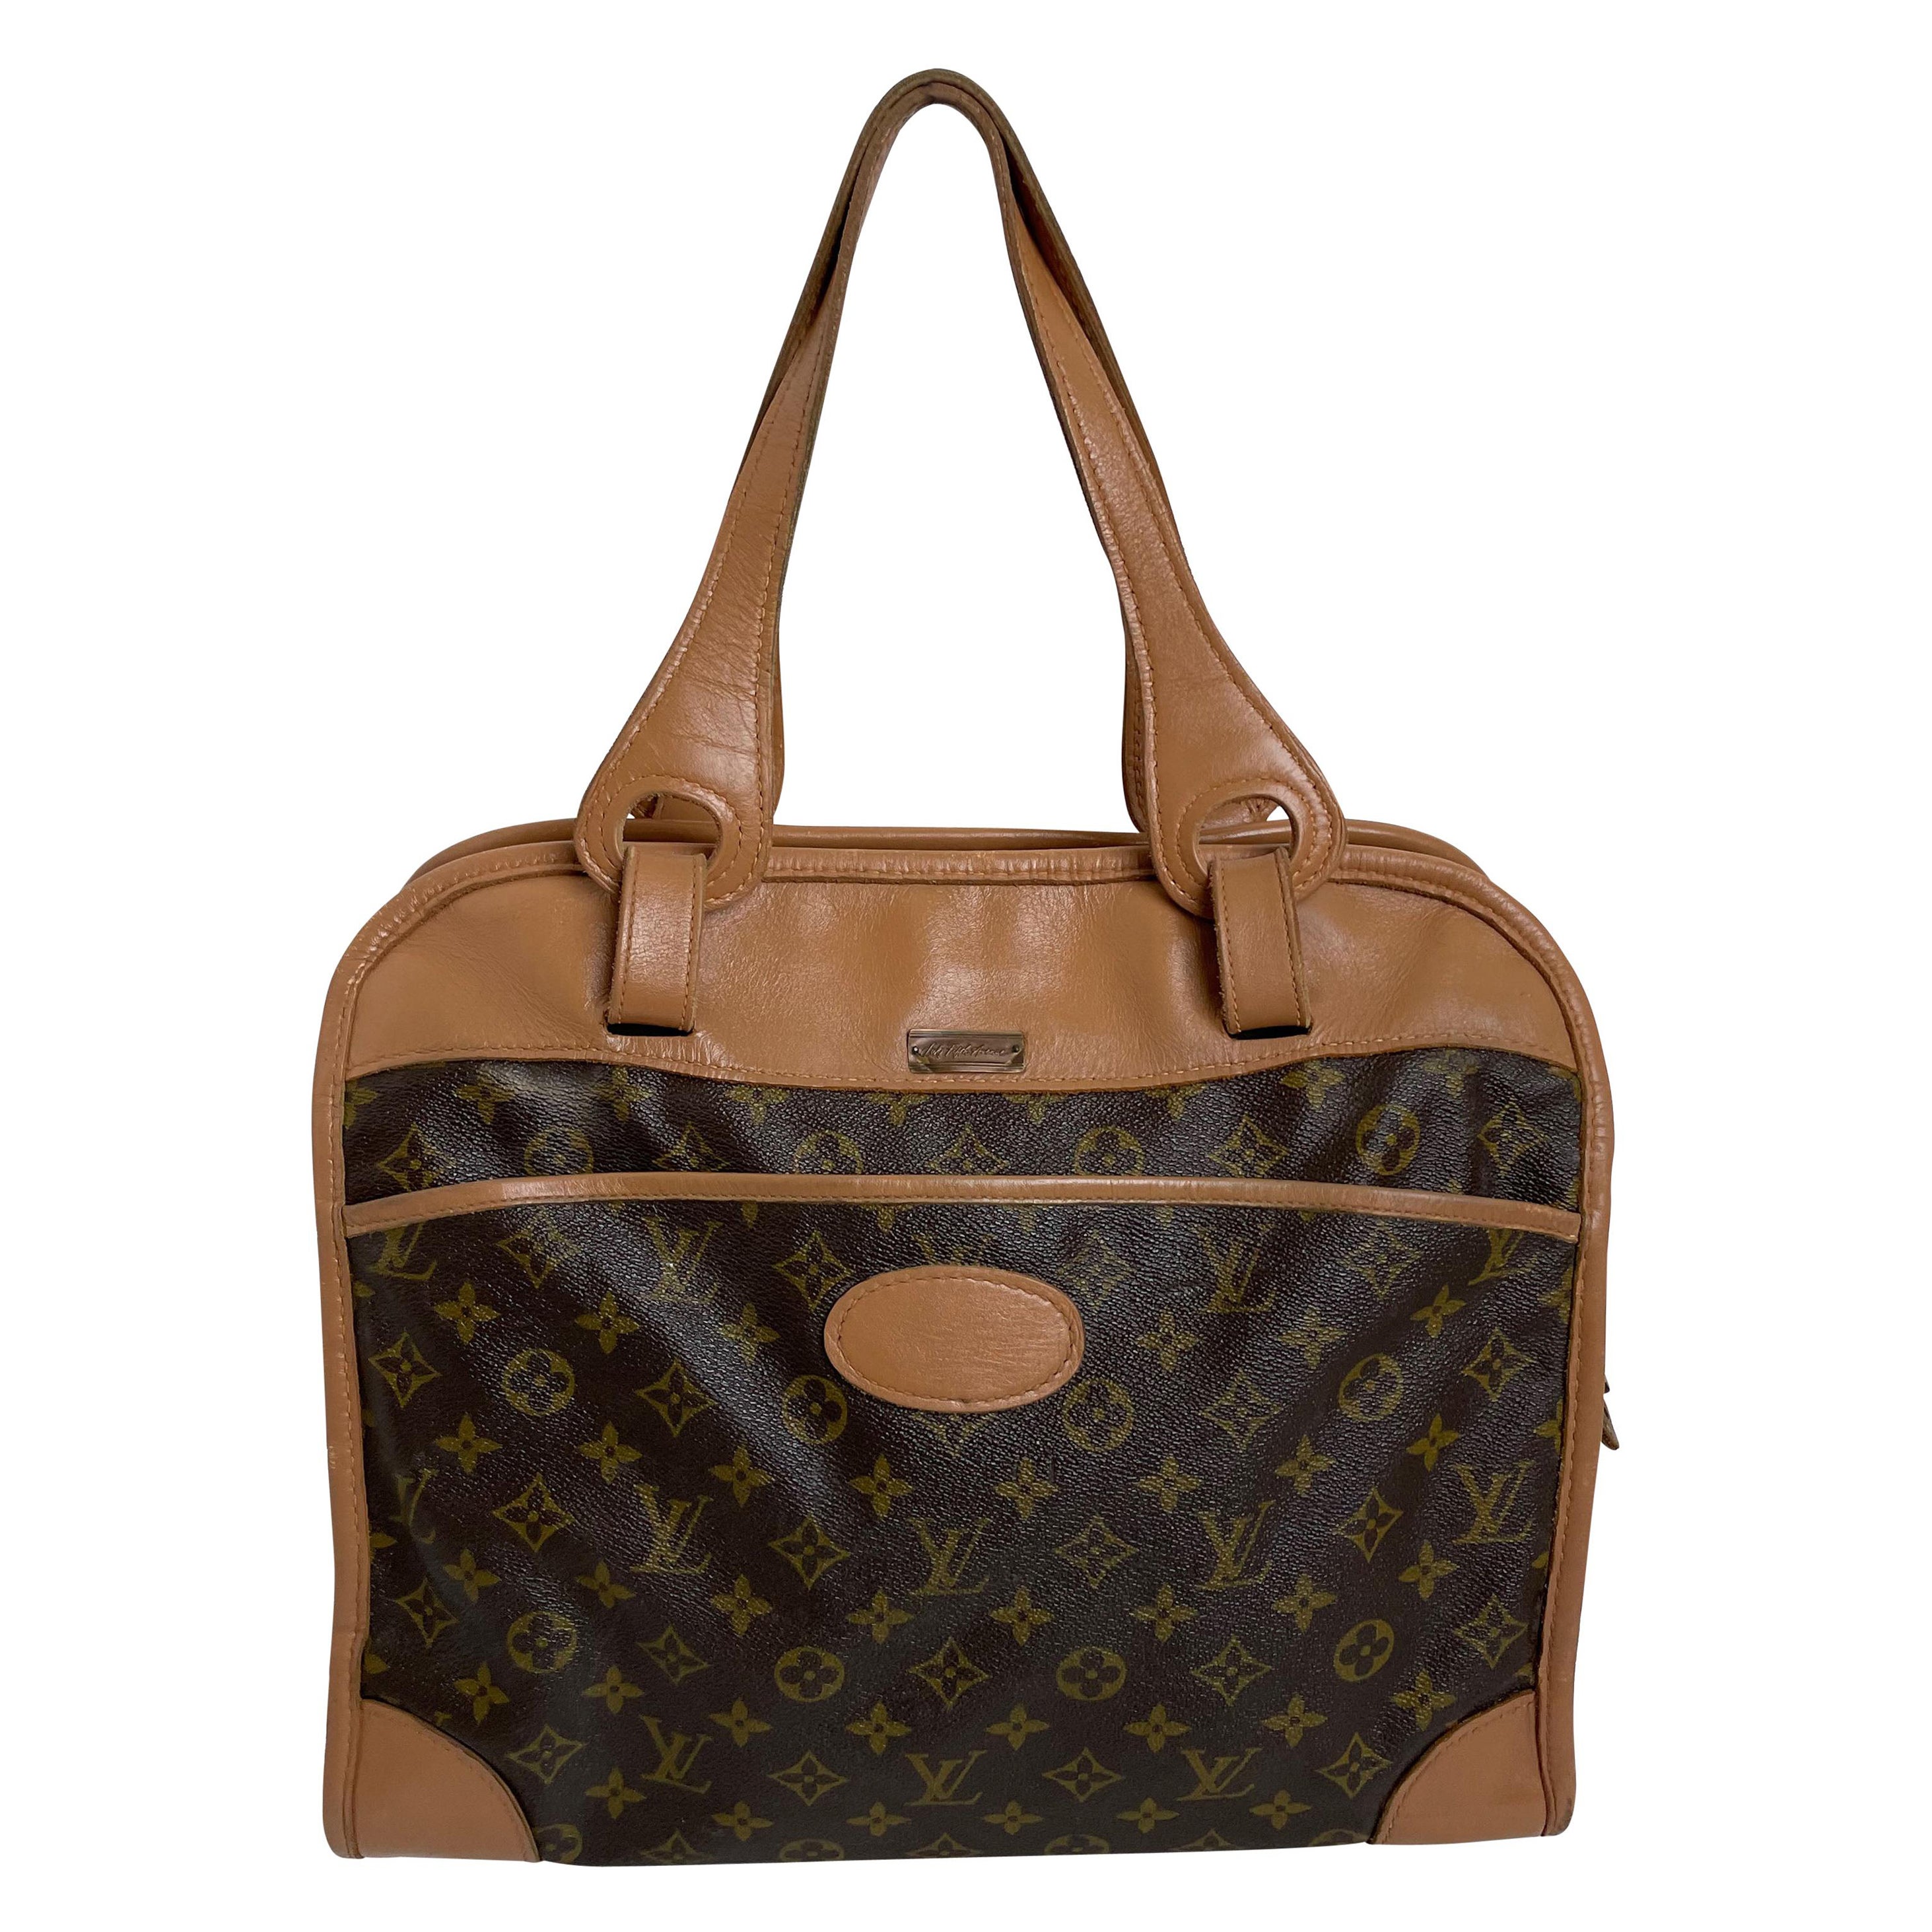 Louis Vuitton Tote Bag Travel Carry On French Luggage Co Saks 5th Ave Vintage  For Sale